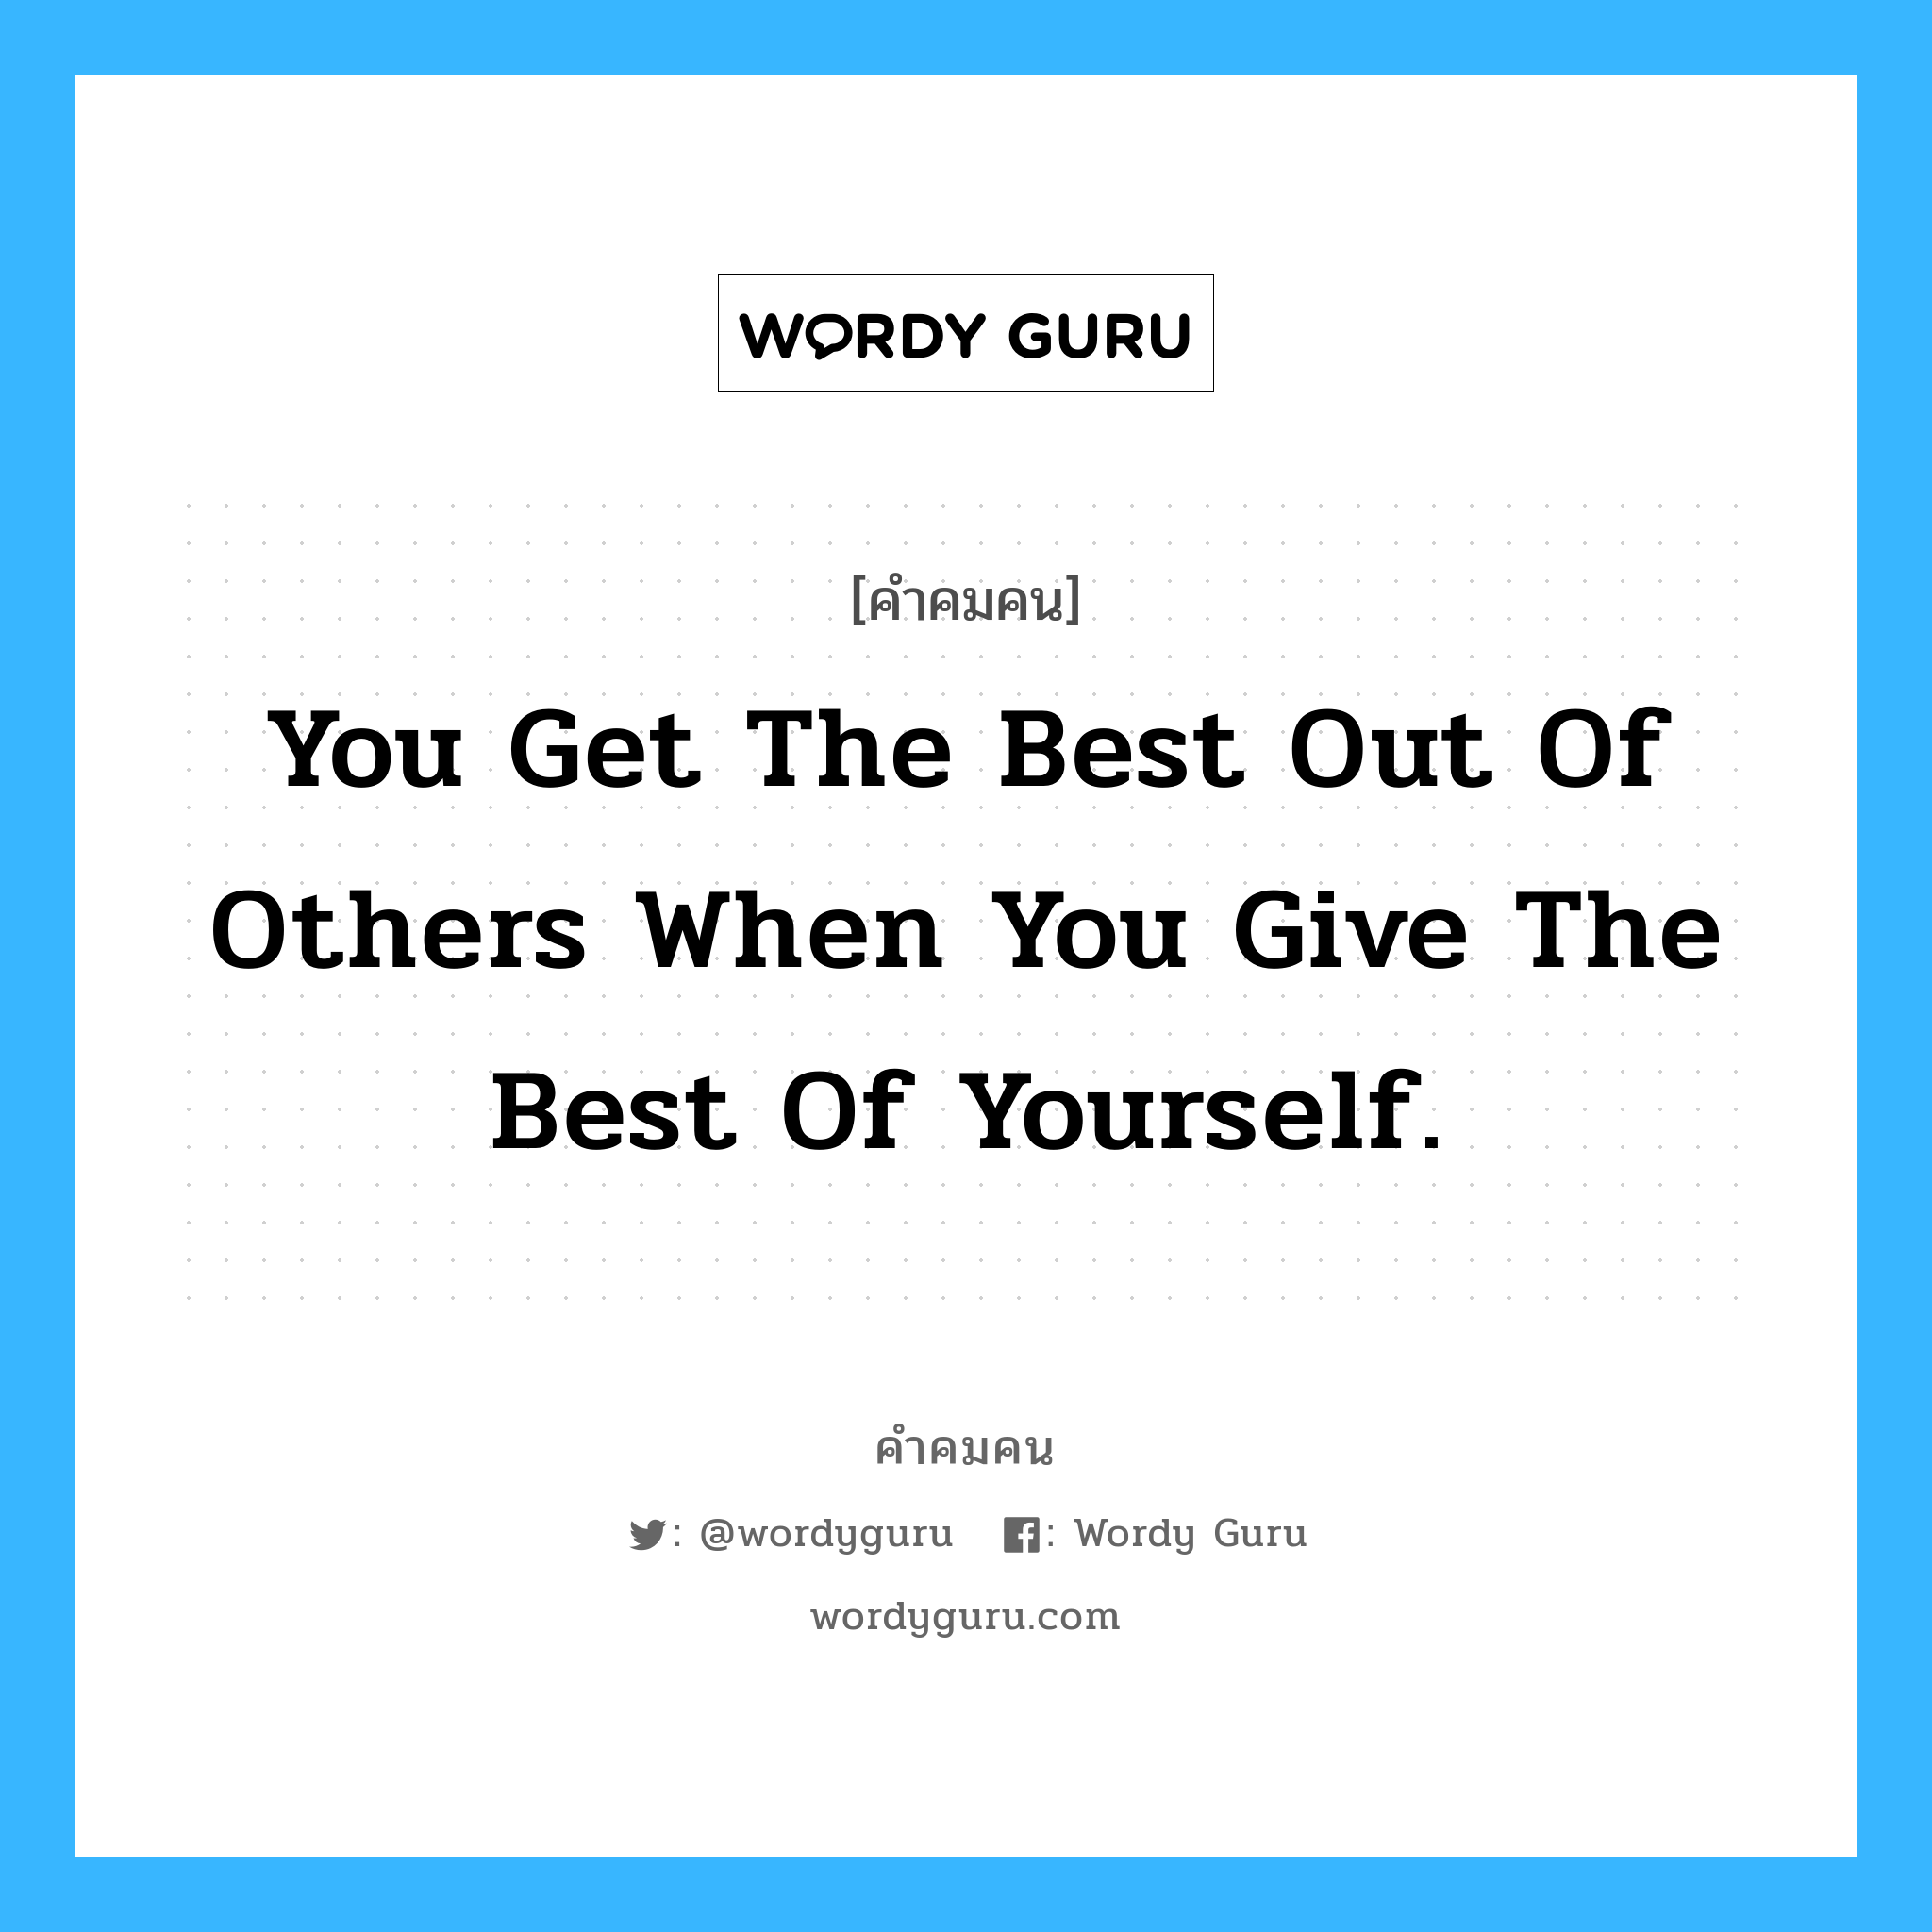 You get the best out of others when you give the best of yourself., คำคมคน You get the best out of others when you give the best of yourself. คุณจะได้รับสิ่งที่ดีที่สุดของคนอื่น เมื่อคุณได้ให้สิ่งที่ดีที่สุดของคุณไป Harvey Firestone หมวด Harvey Firestone